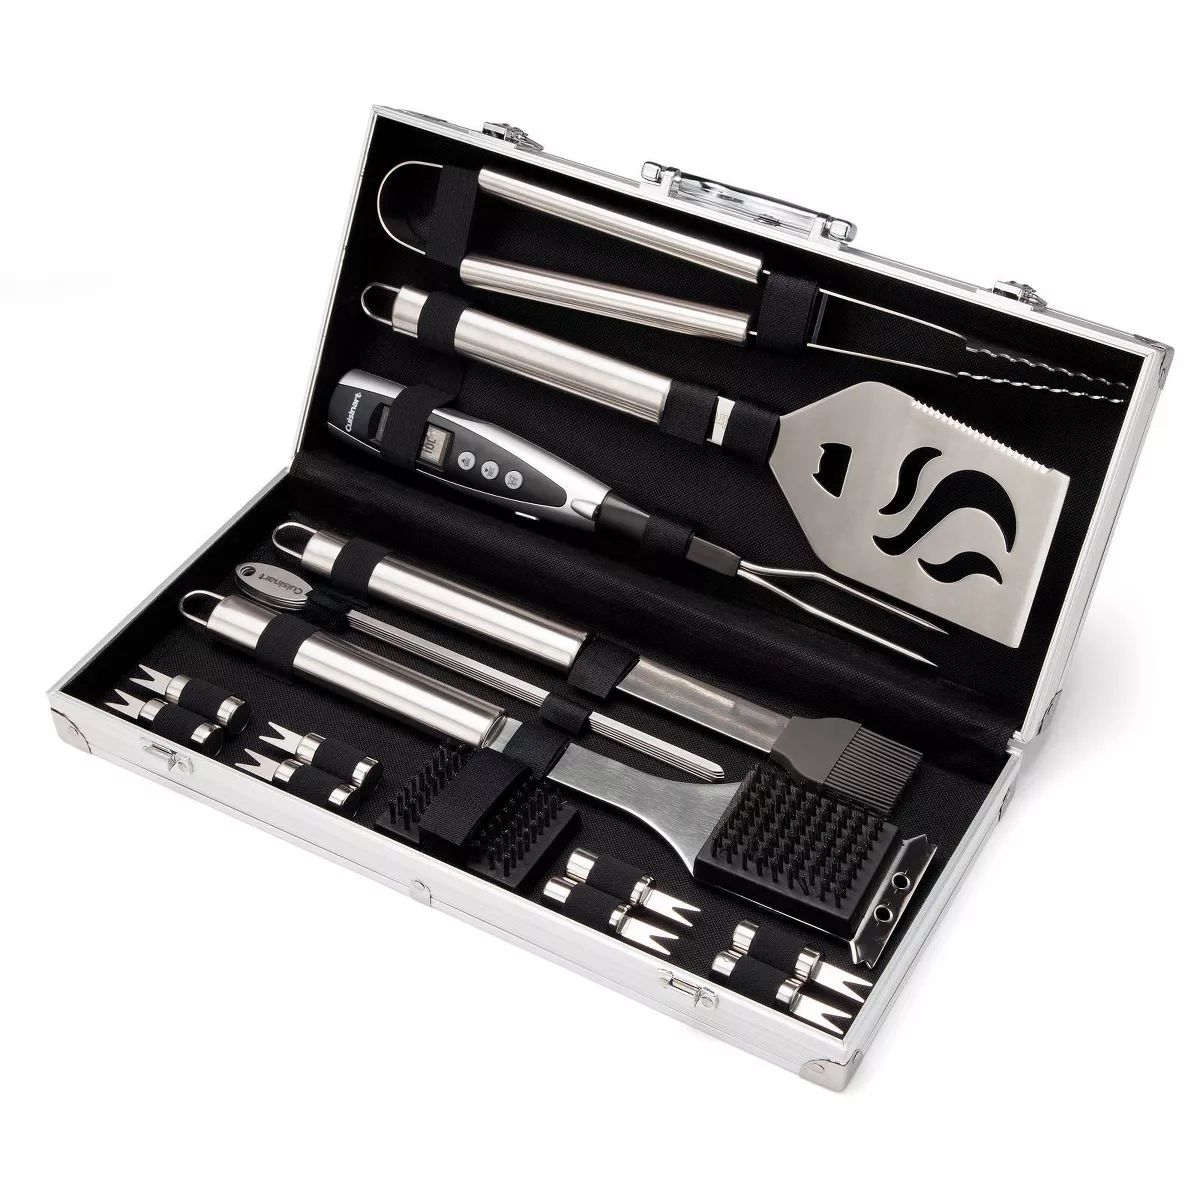 Cuisinart CGS-5020Z 10pc Deluxe Stainless Steel Grill Tool Set | Target